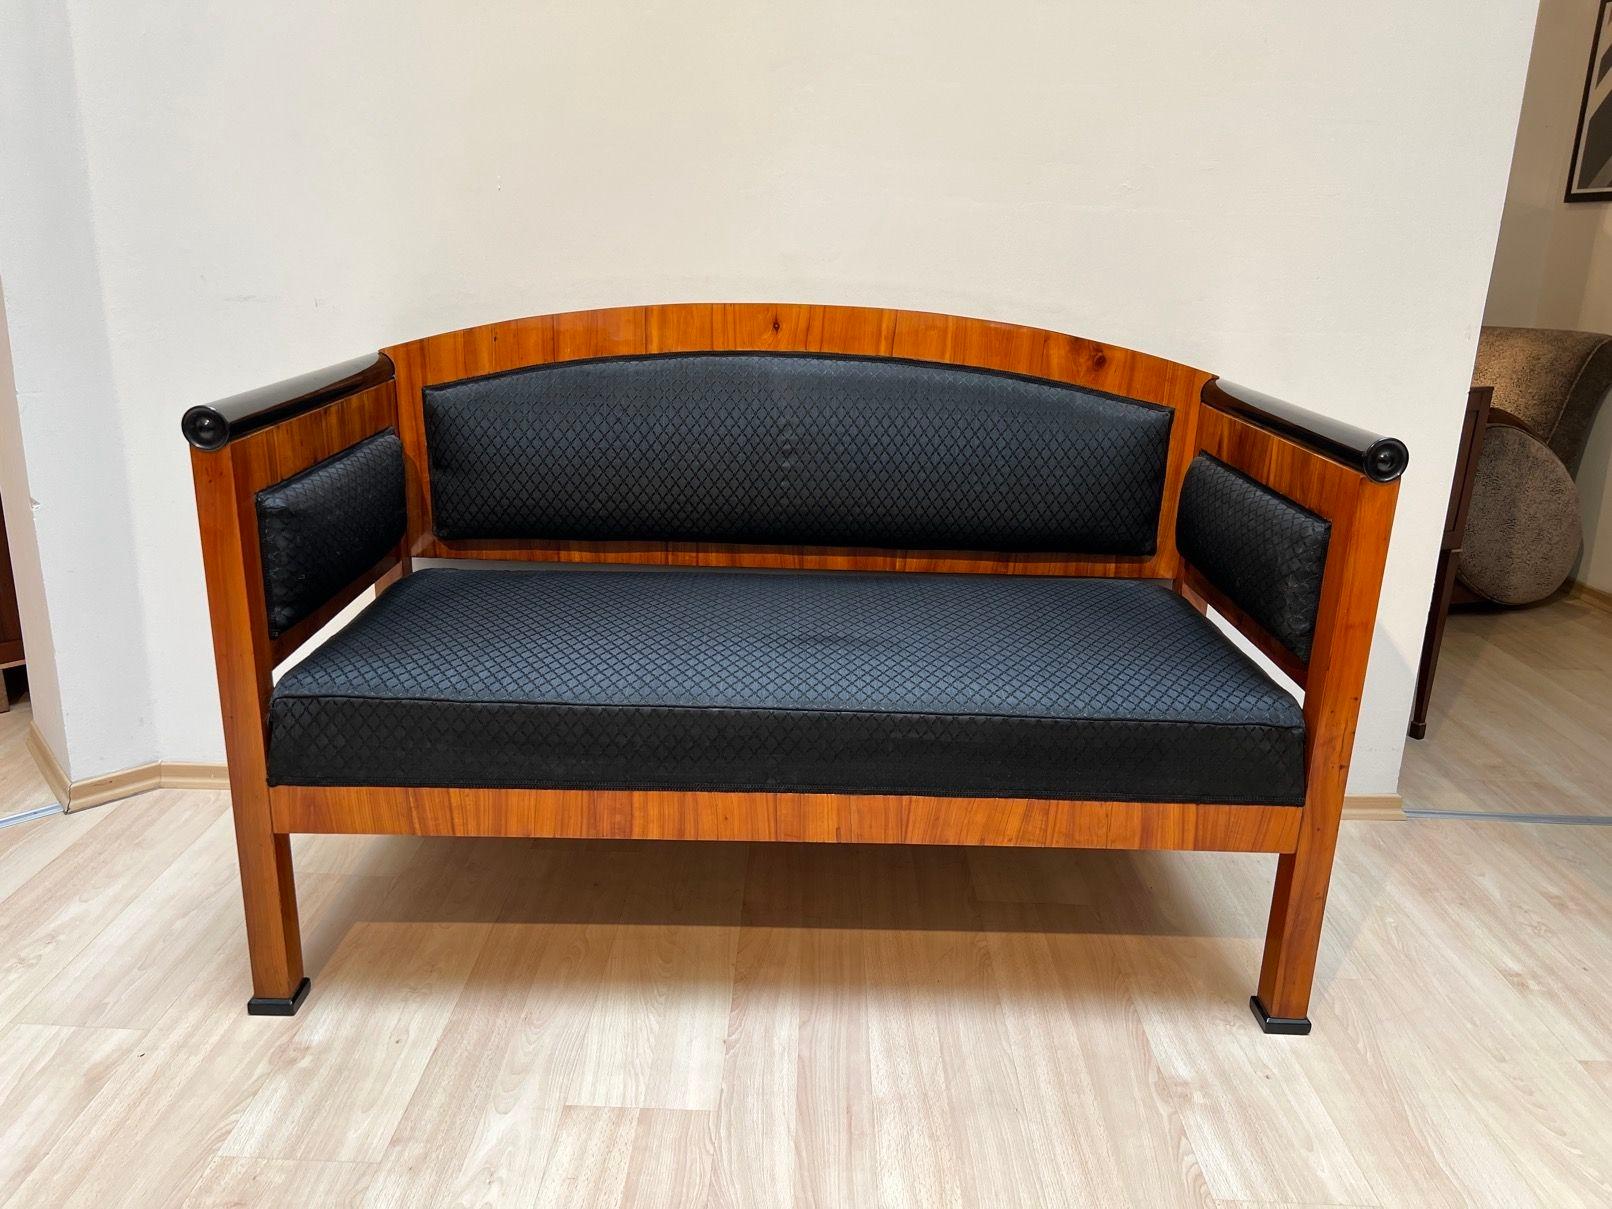 Beautiful straightened neoclassical Biedermeier Sofa or Bench from South Germany about 1830.
Cherry veneered and solid. Solid „Stollen“ feet. Ebonized round bars on the armrests. Black horsehair upholstery fabric.
Very good seating comfort. Restored